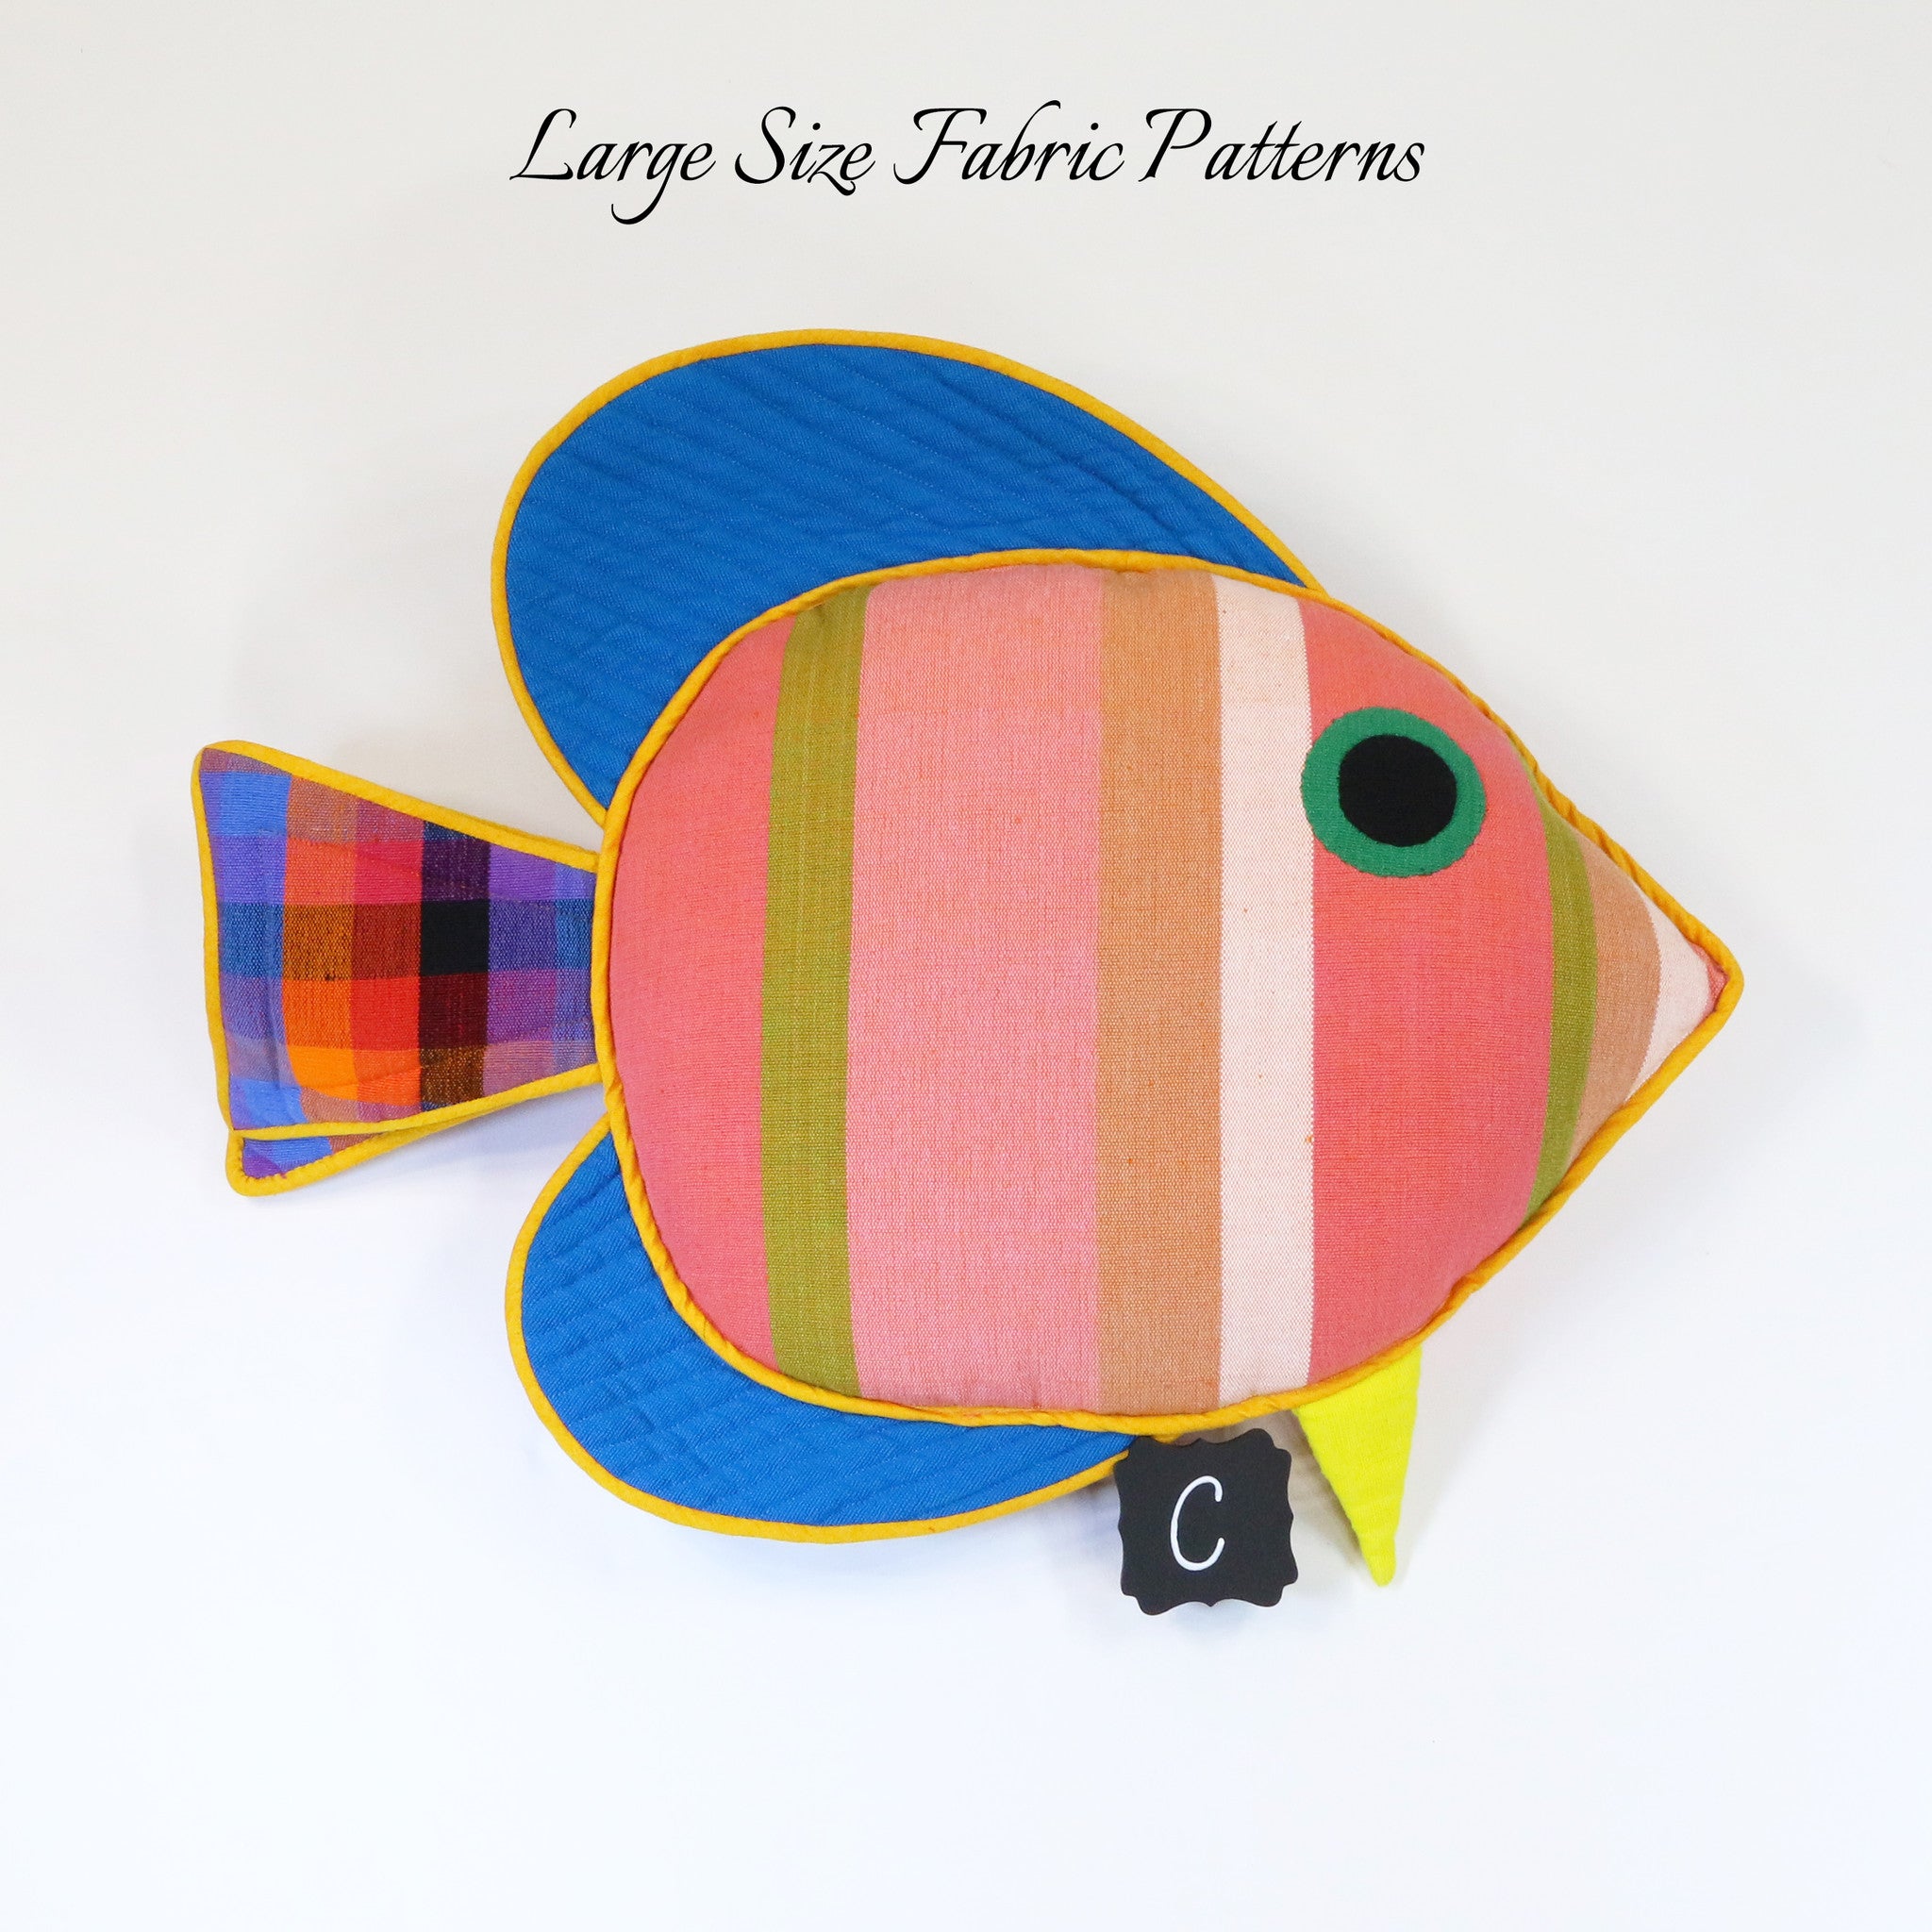 Daisy, the Sail Fin Fish – large size fabric patterns shown